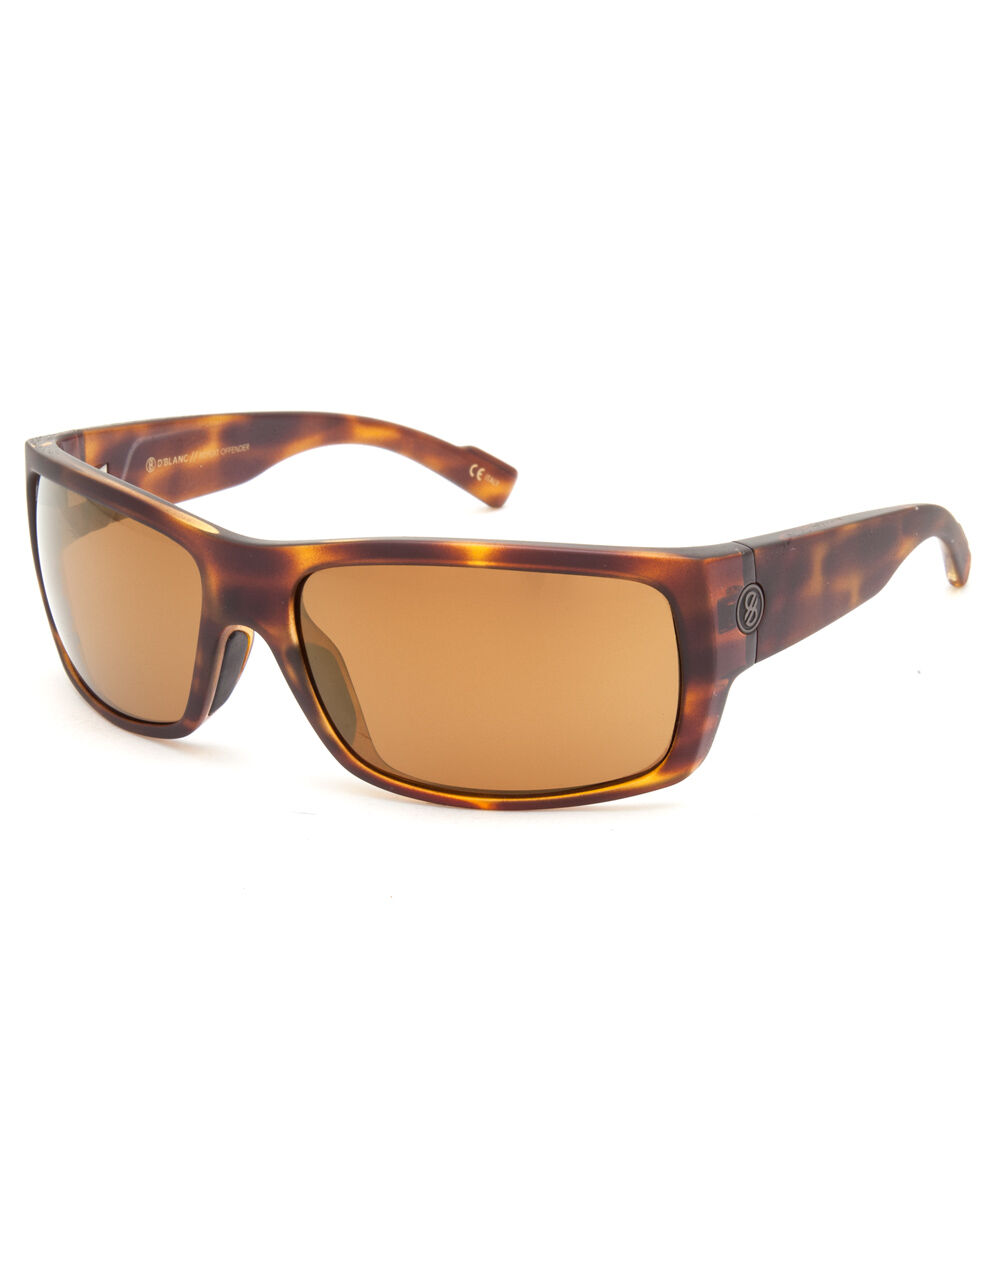 D'BLANC REPEAT OFFENDER POLARIZED SUNGLASSES